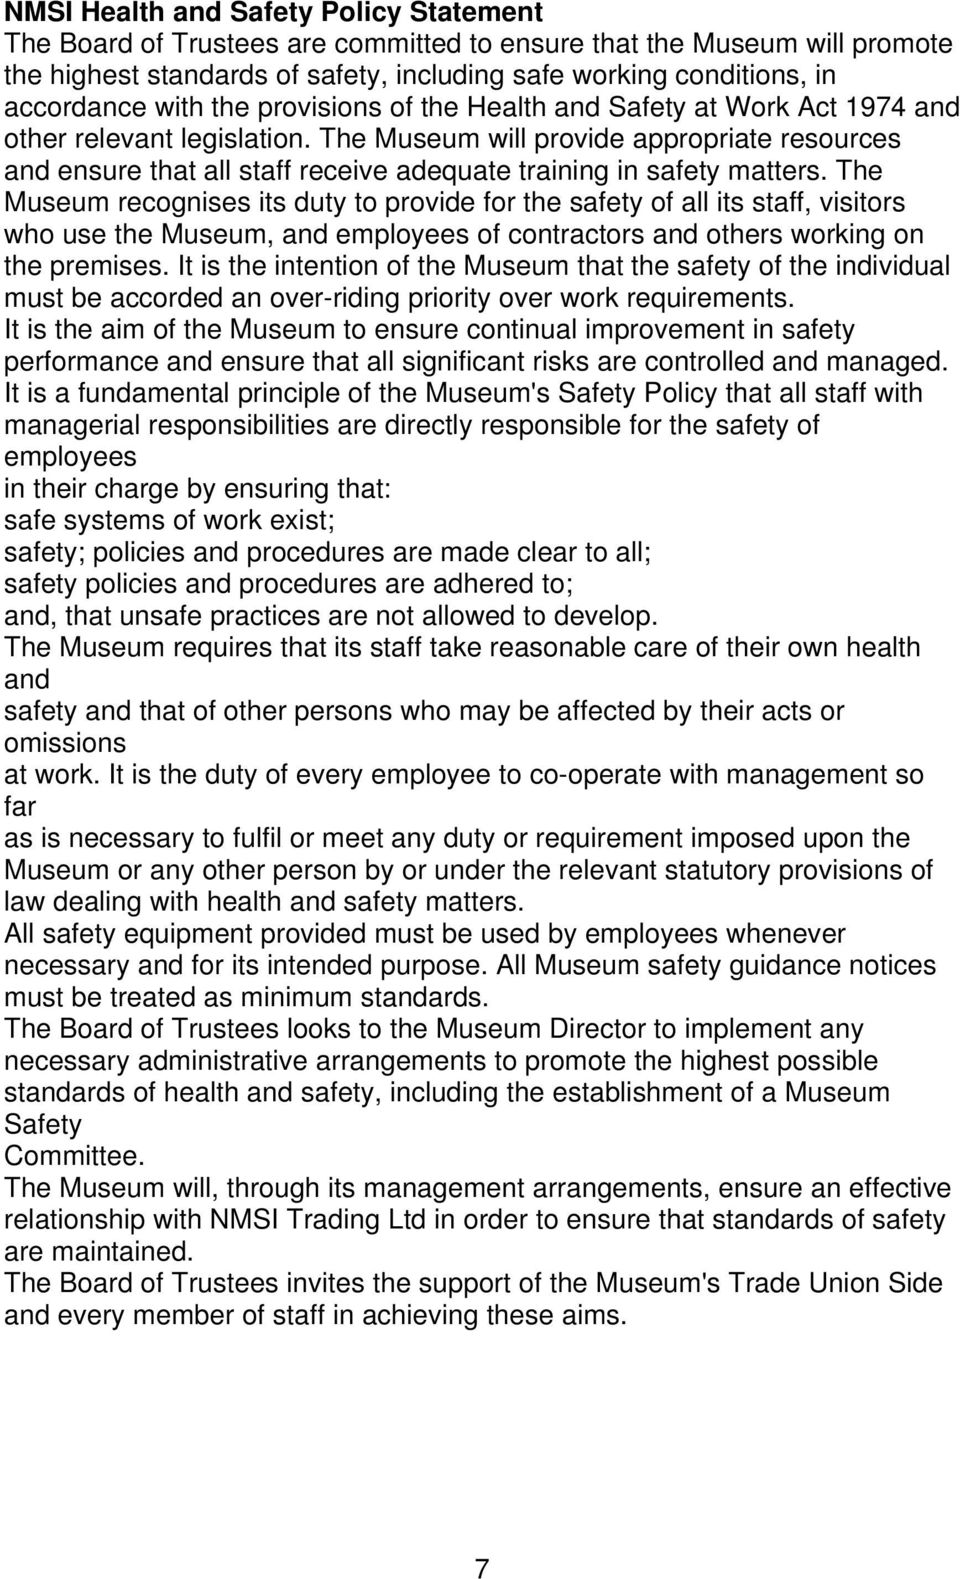 The Museum will provide appropriate resources and ensure that all staff receive adequate training in safety matters.